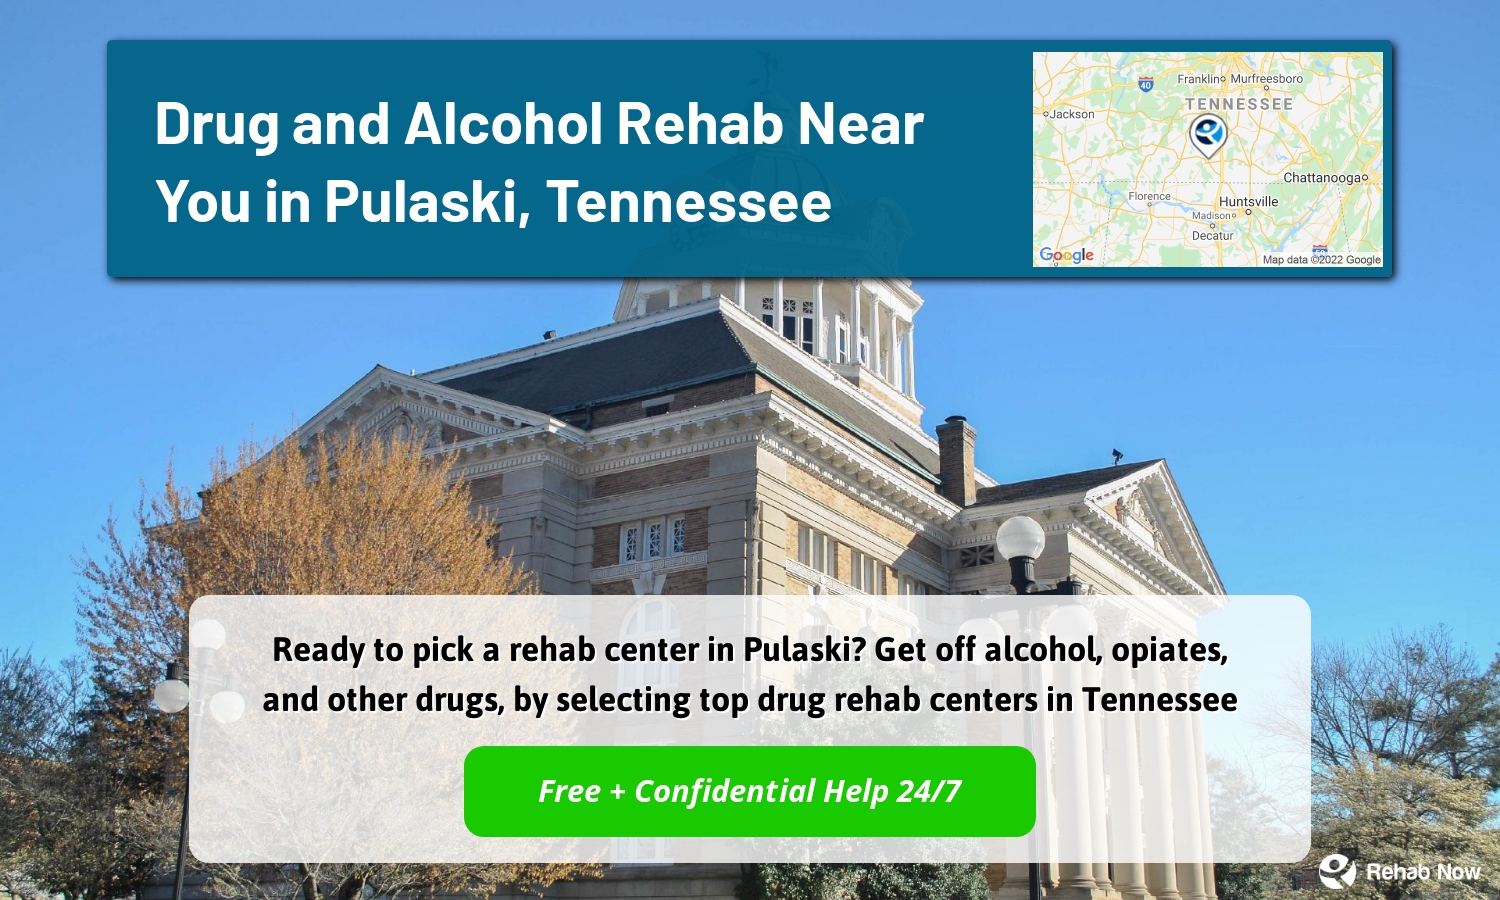 Ready to pick a rehab center in Pulaski? Get off alcohol, opiates, and other drugs, by selecting top drug rehab centers in Tennessee